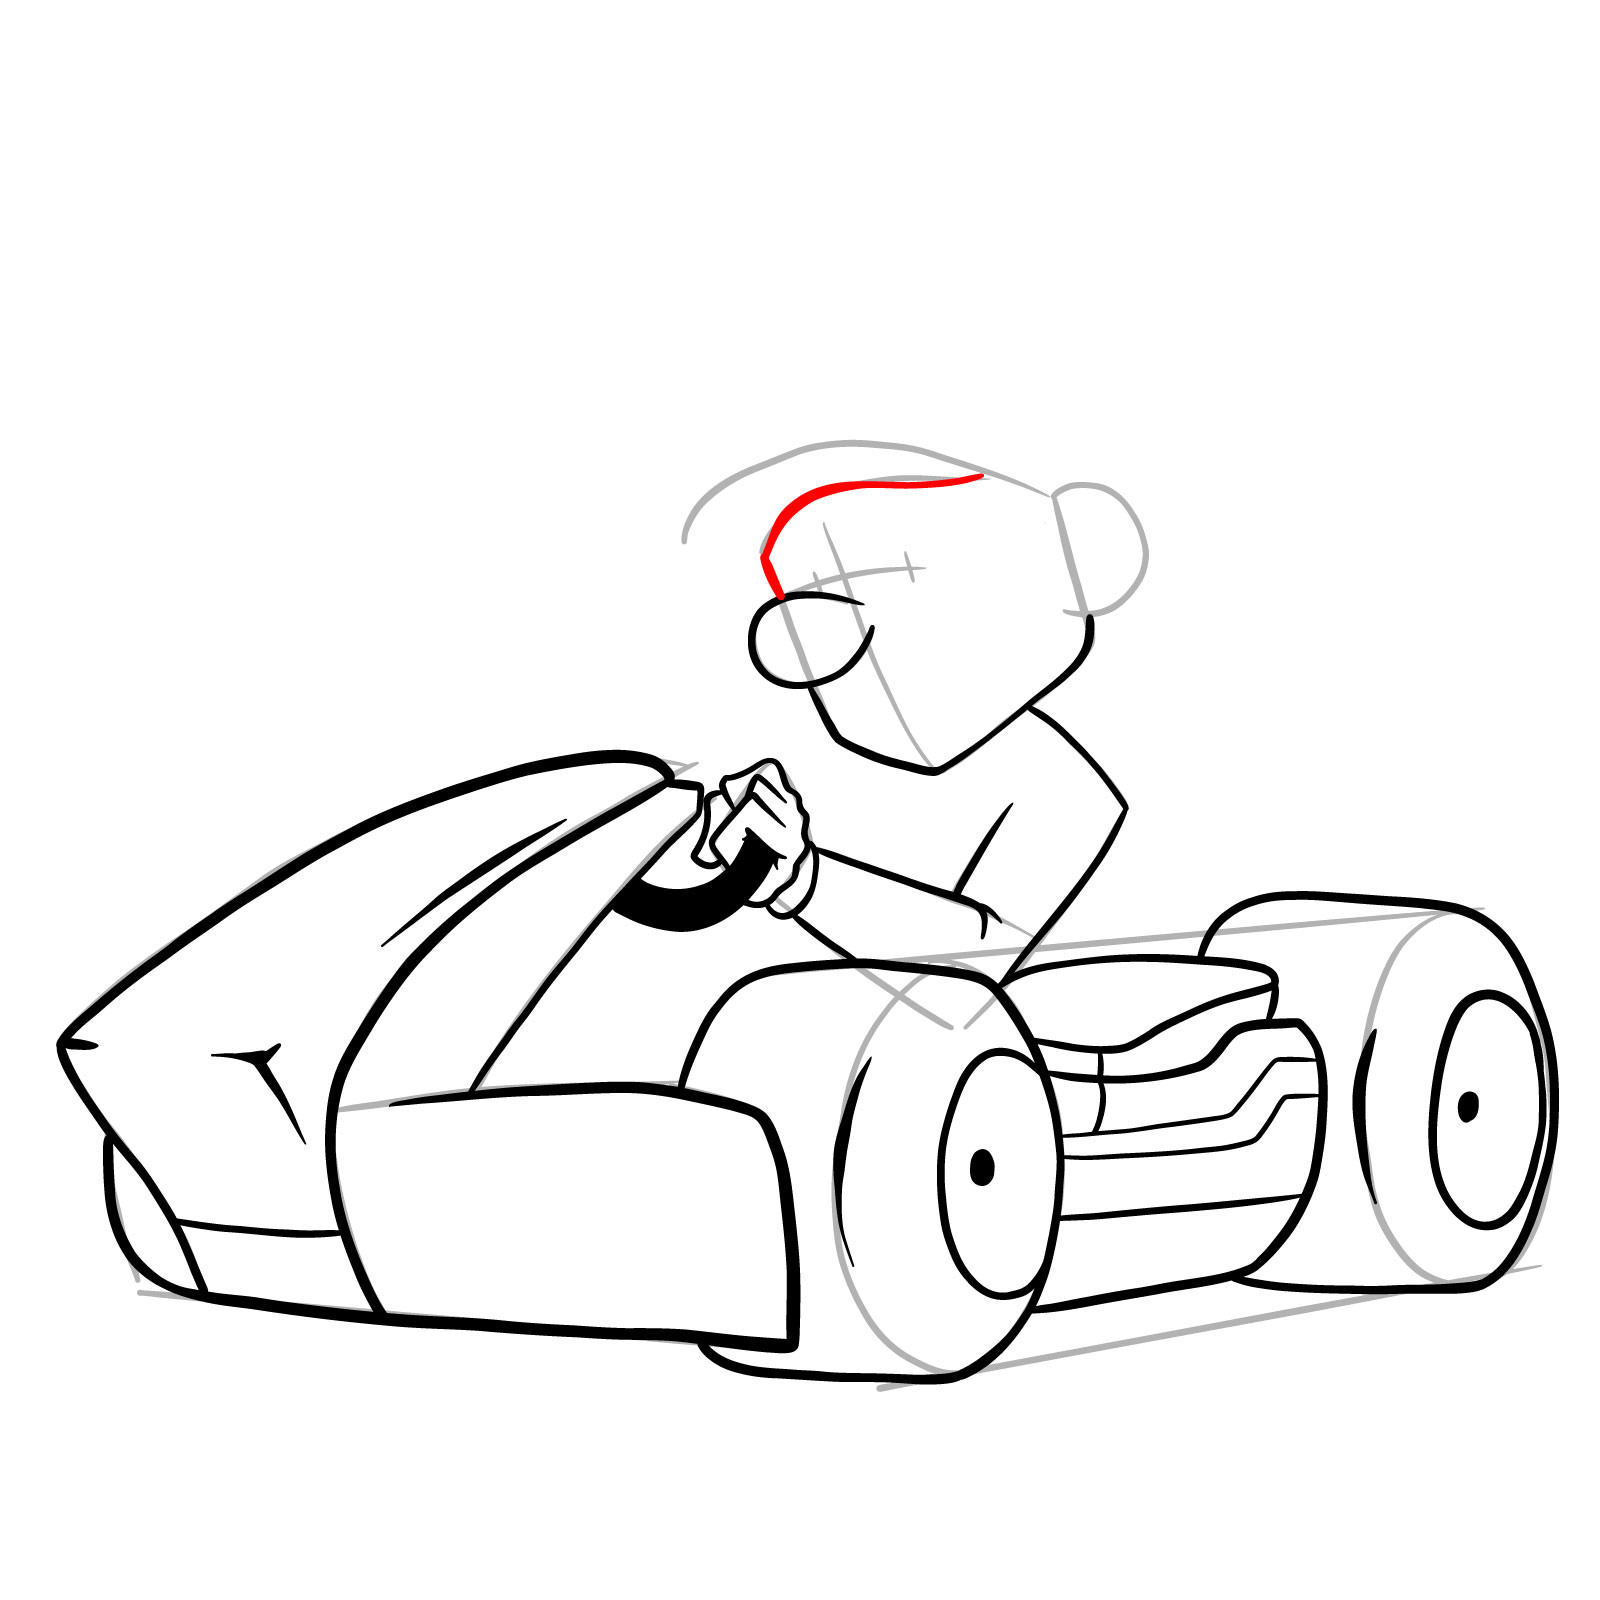 How to draw Race Traitors Mario - step 22